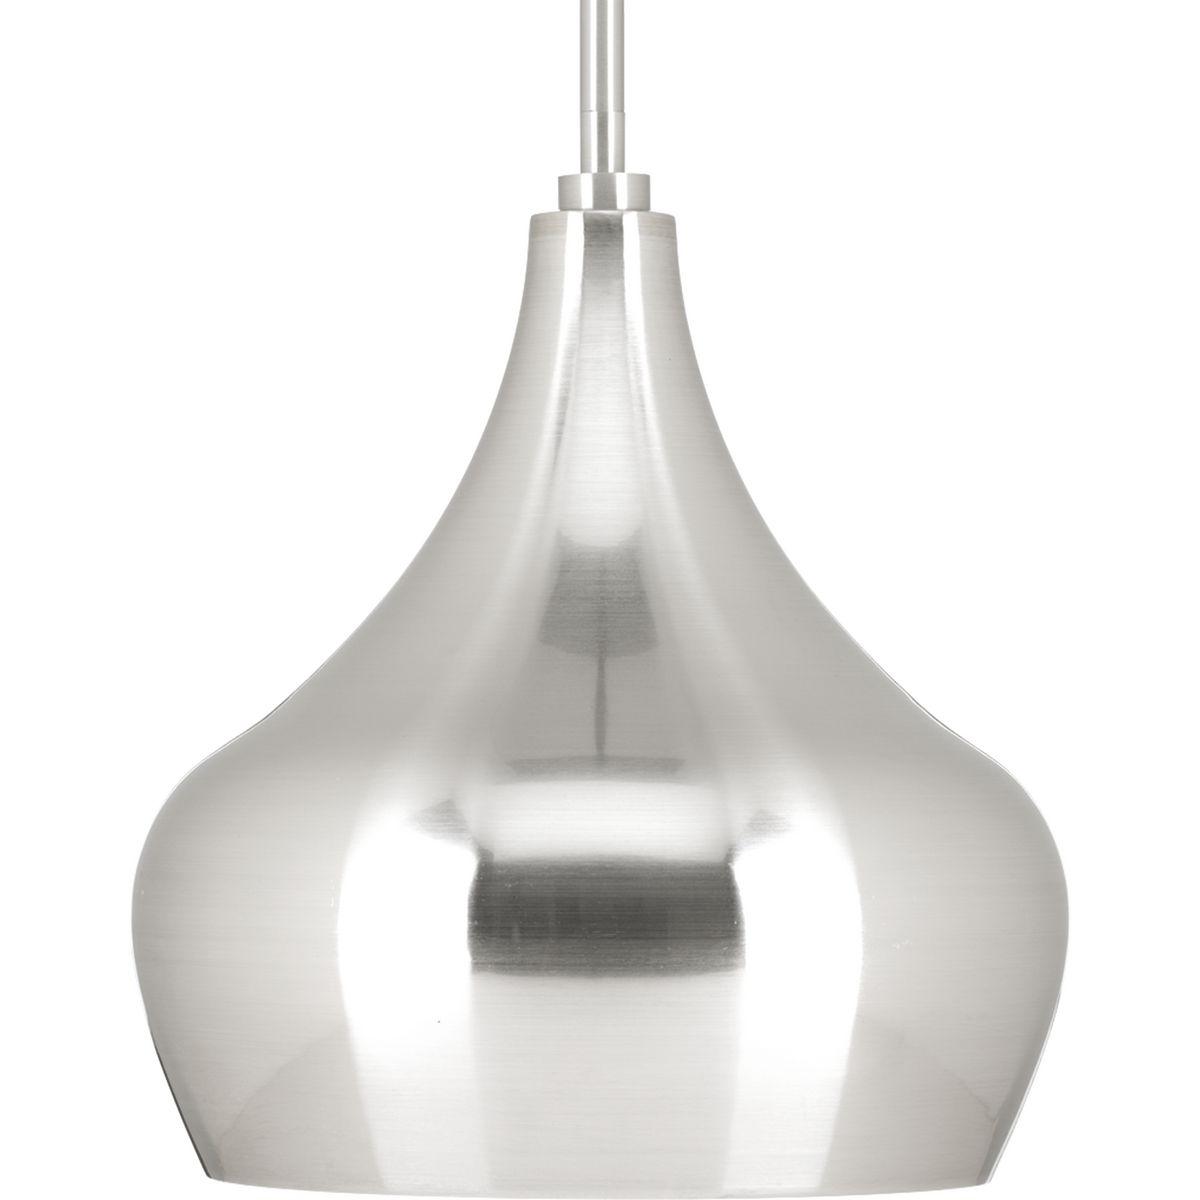 Hubbell P5187-0930K9 Uniquely shaped modern 10 inch LED pendant with sleek lines. This pendant utilizes a Brushed Nickel Finish with a white linen interior for optimal light output. This pendant is ideal for modern, transitional or urban industrial kitchens.  ; Modern LED min